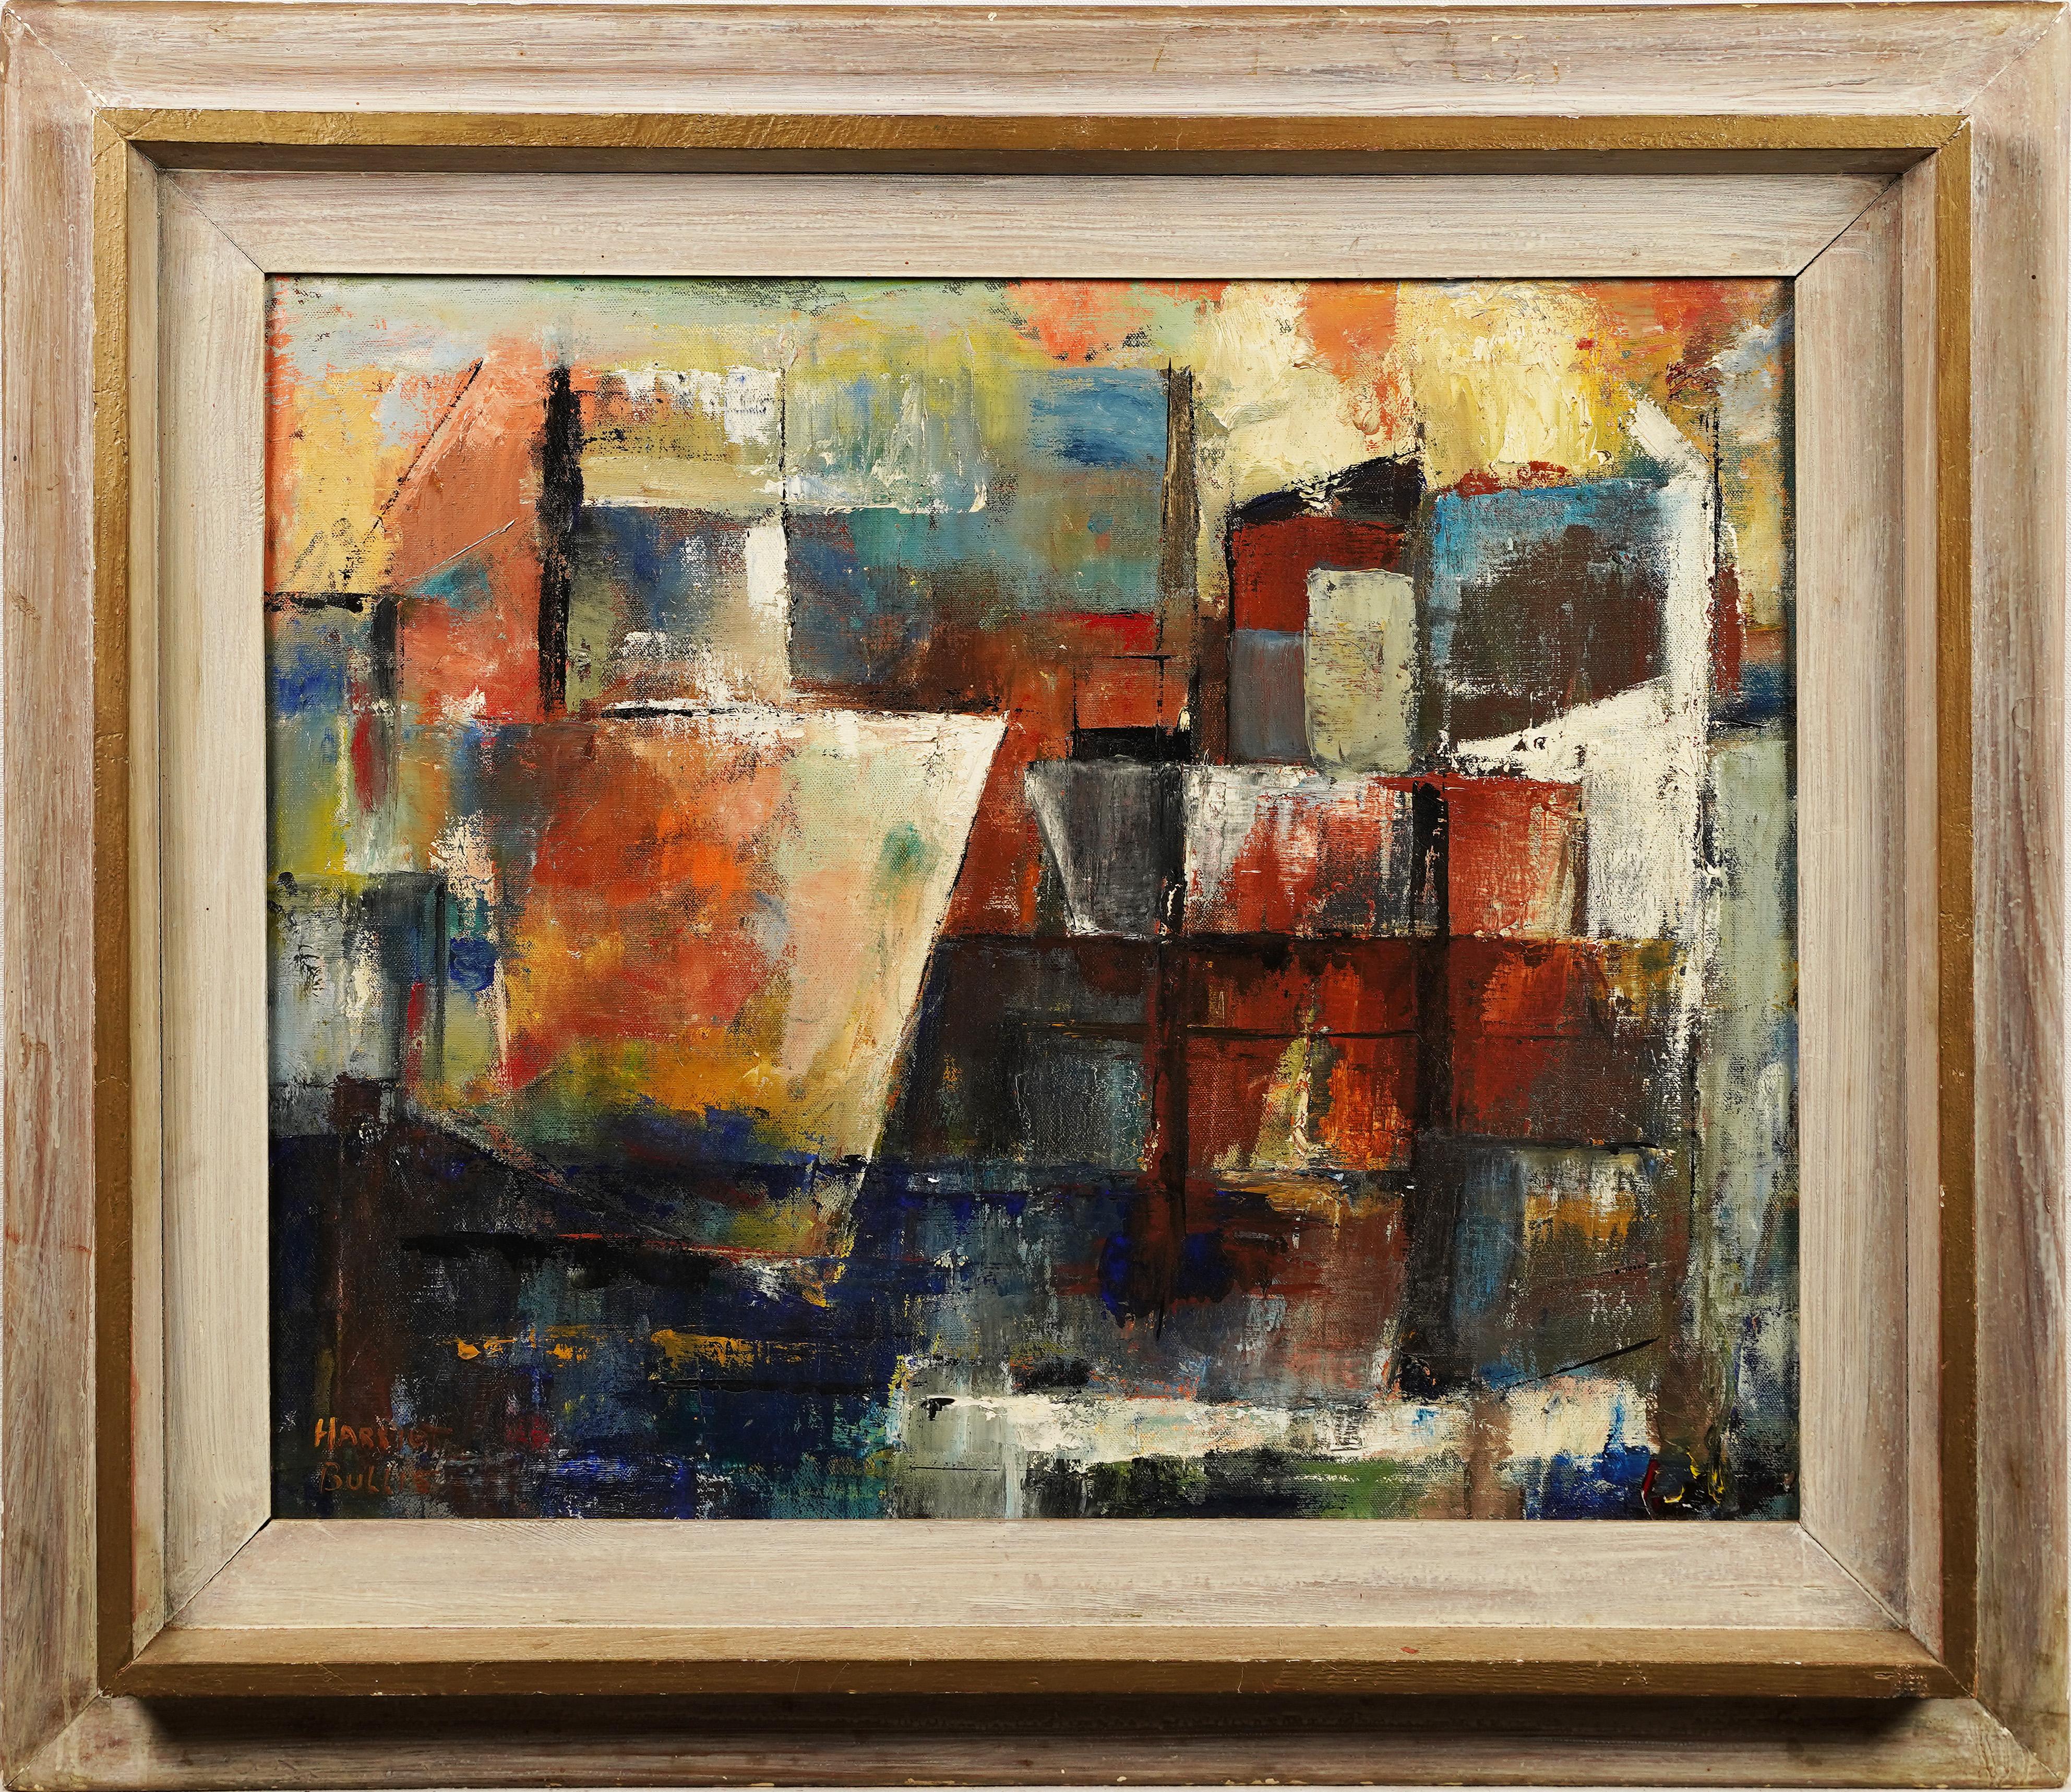 Antique American signed modernist oil painting.  Oil on canvas.  Signed.  Framed.  Image size, 24L x 20H.